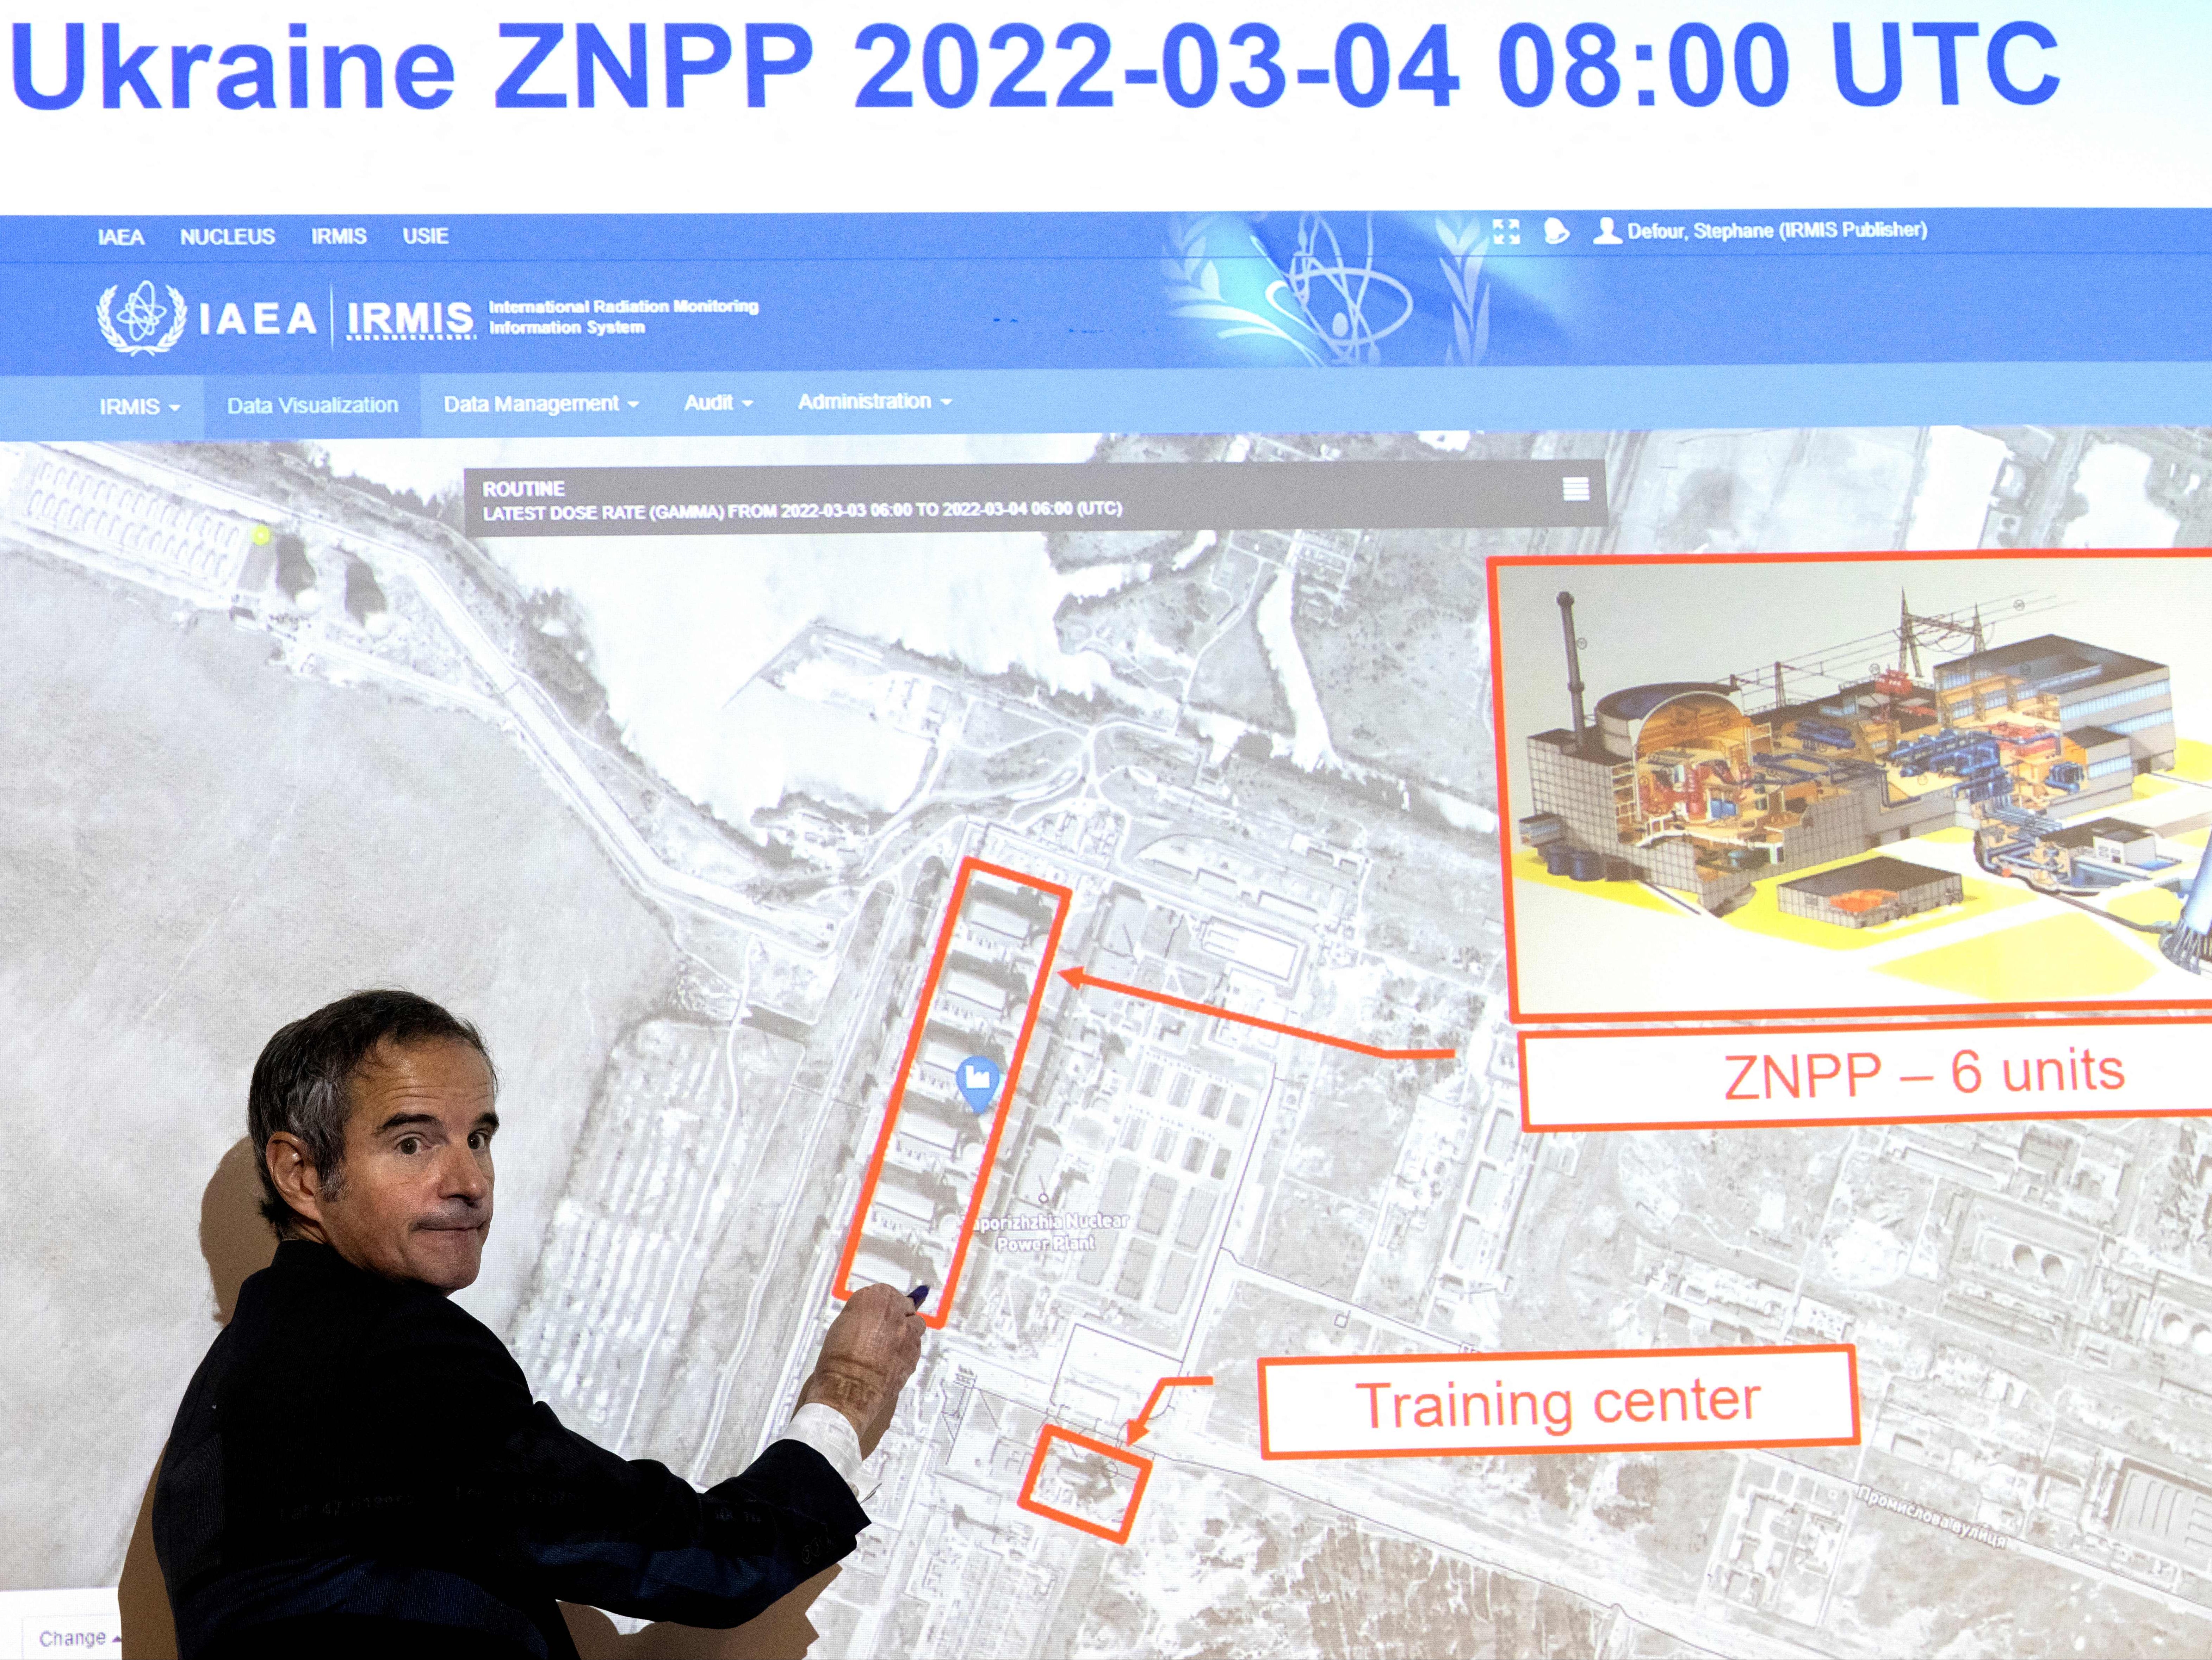 Rafael Grossi points on a map of the Zaporizhzhia nuclear power plant